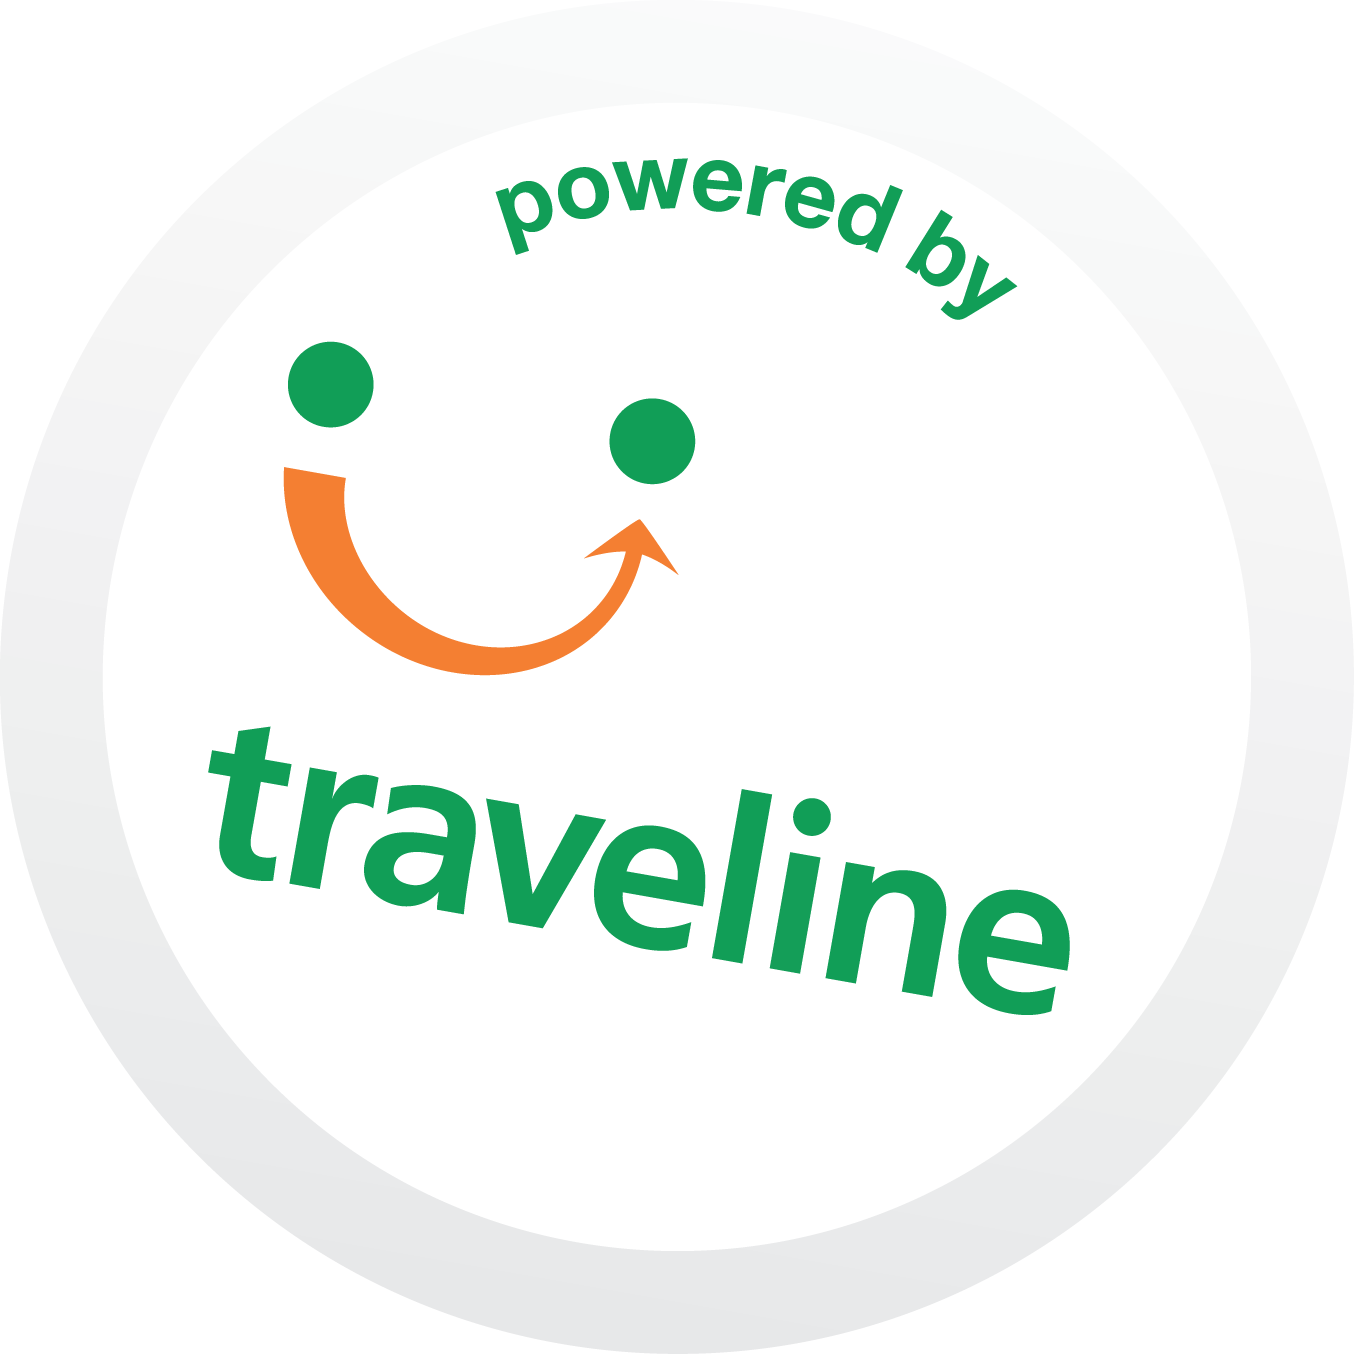 Powered by Traveline